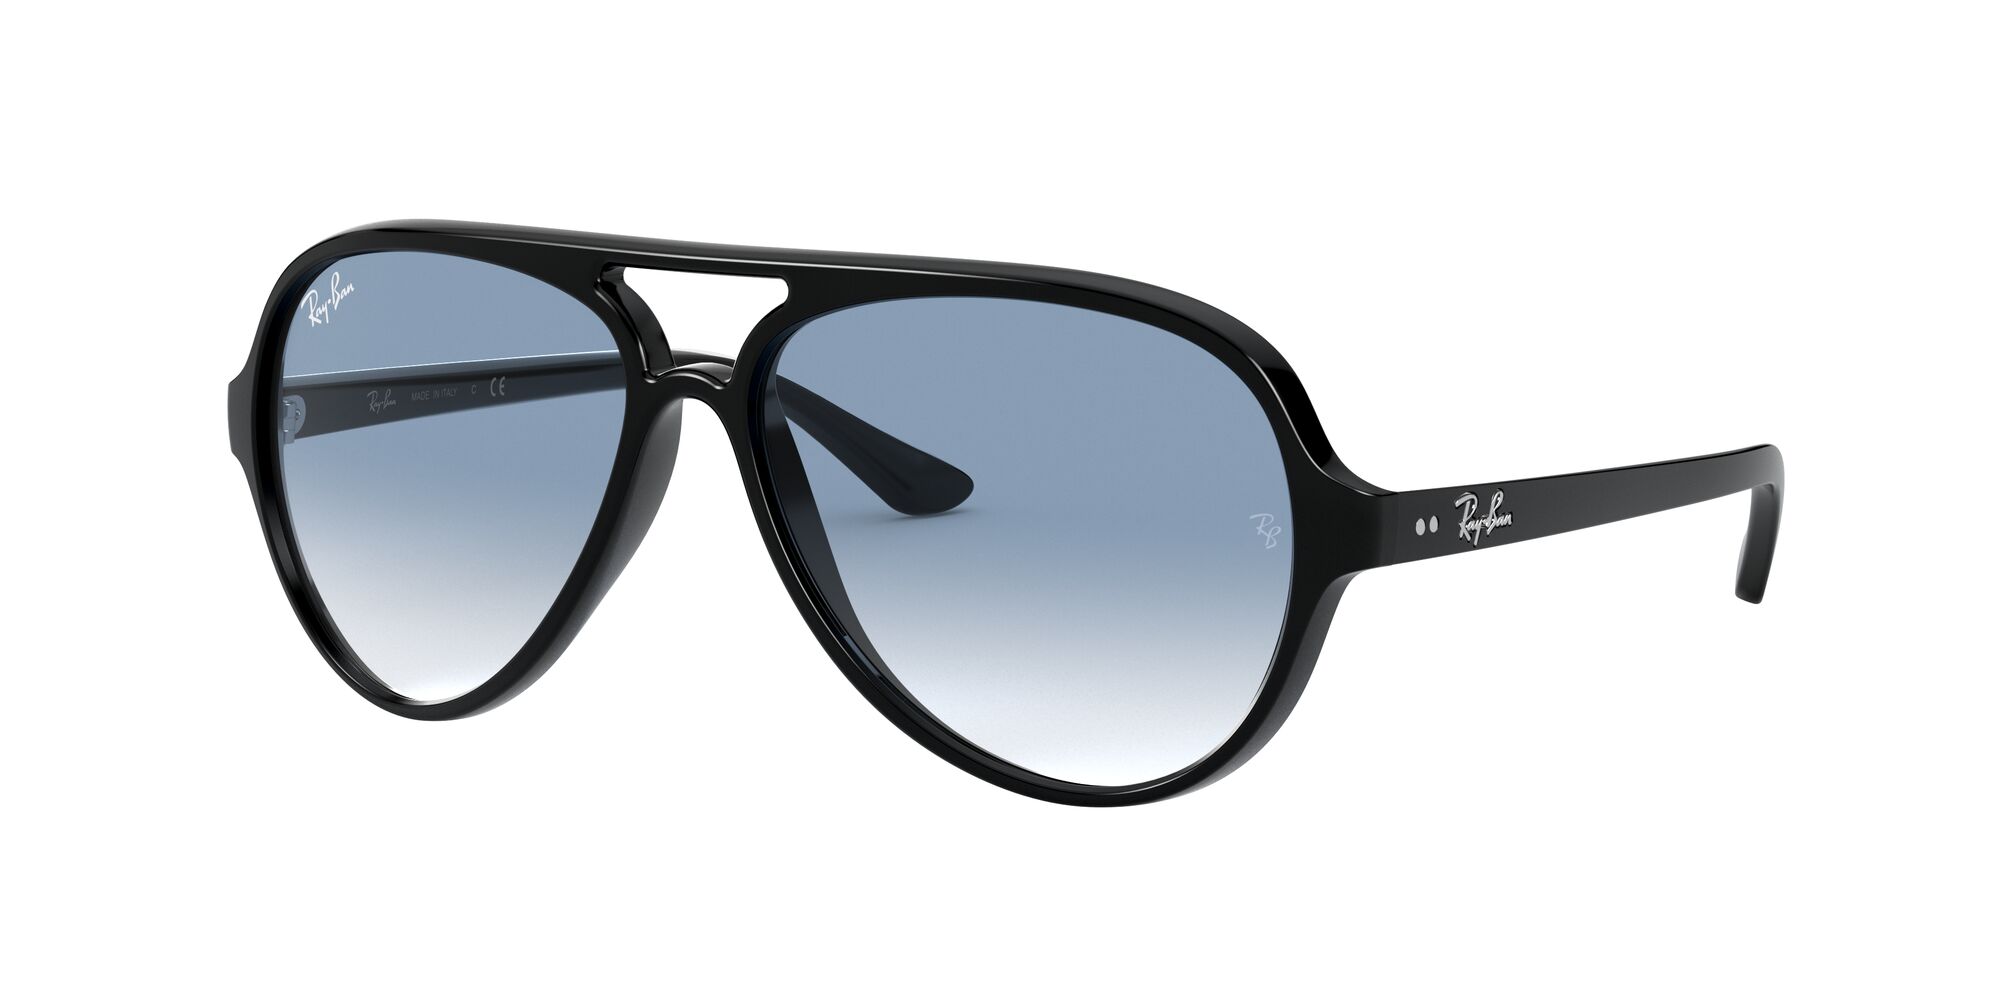 Ray-Ban RB4125 Cats 5000 Sunglasses - image 2 of 12